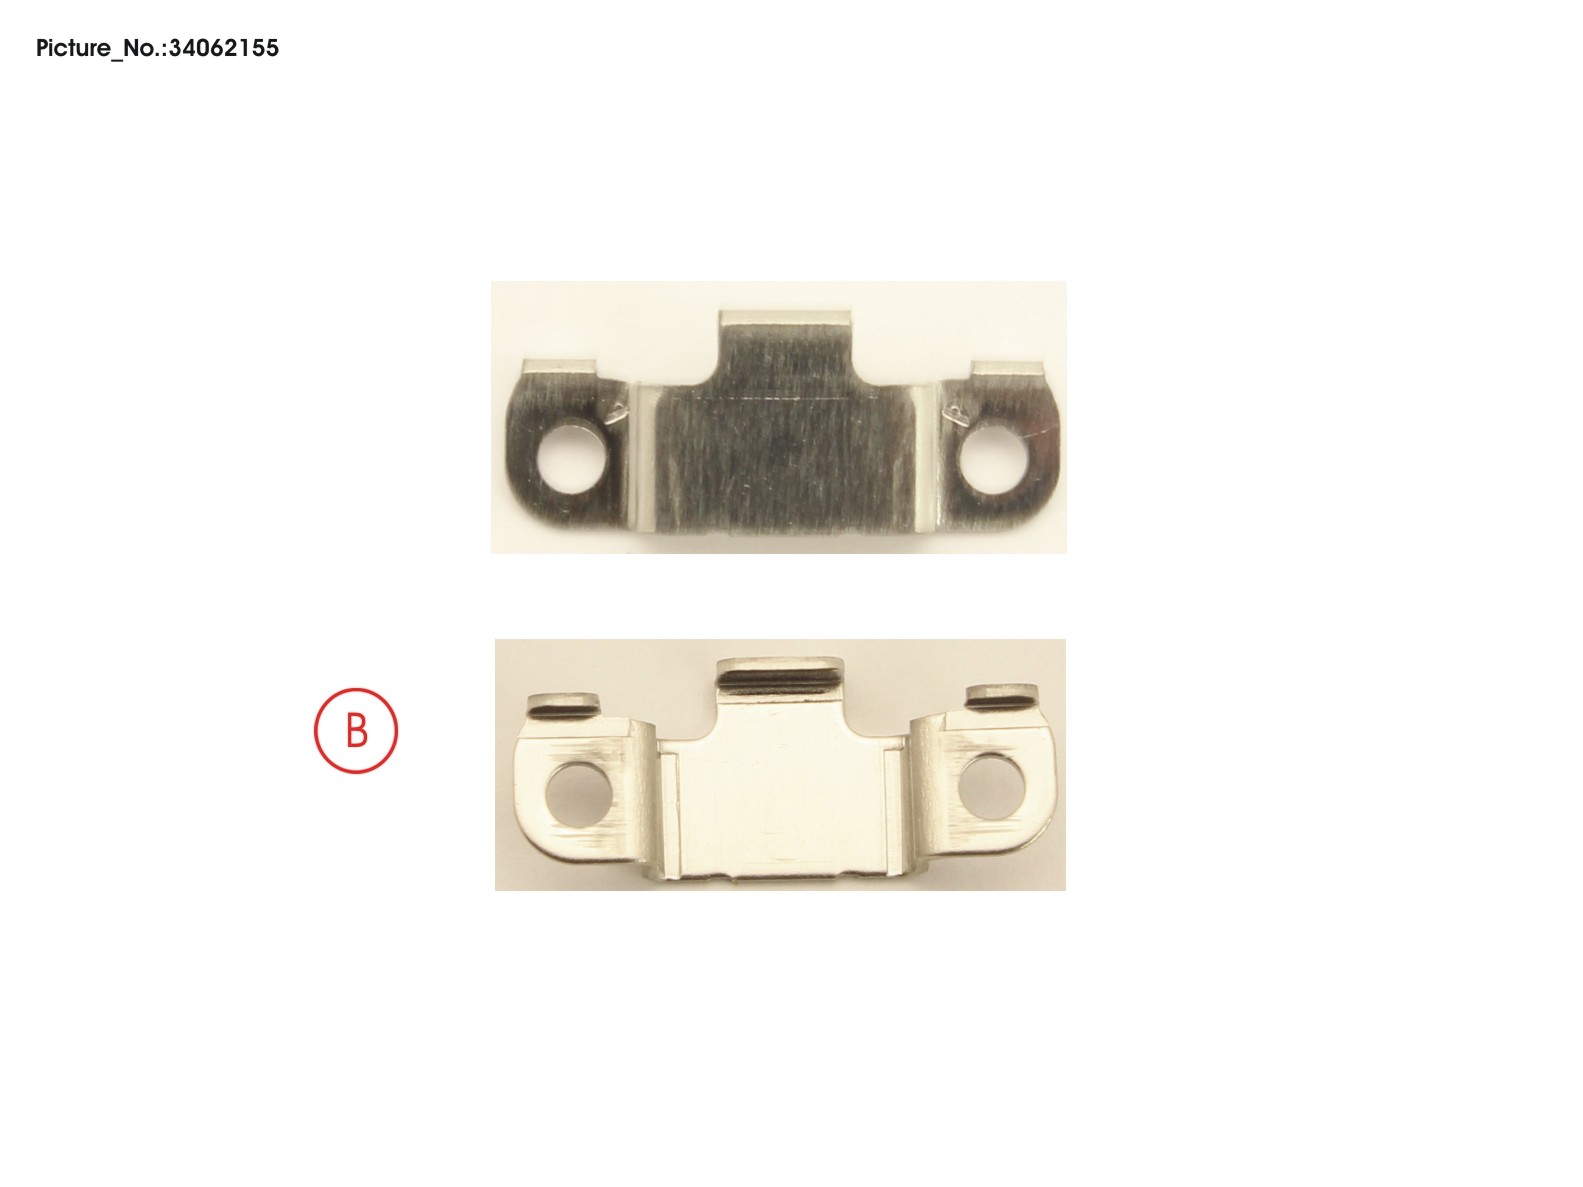 BRACKET FOR USB TYPE-C CONNECTOR